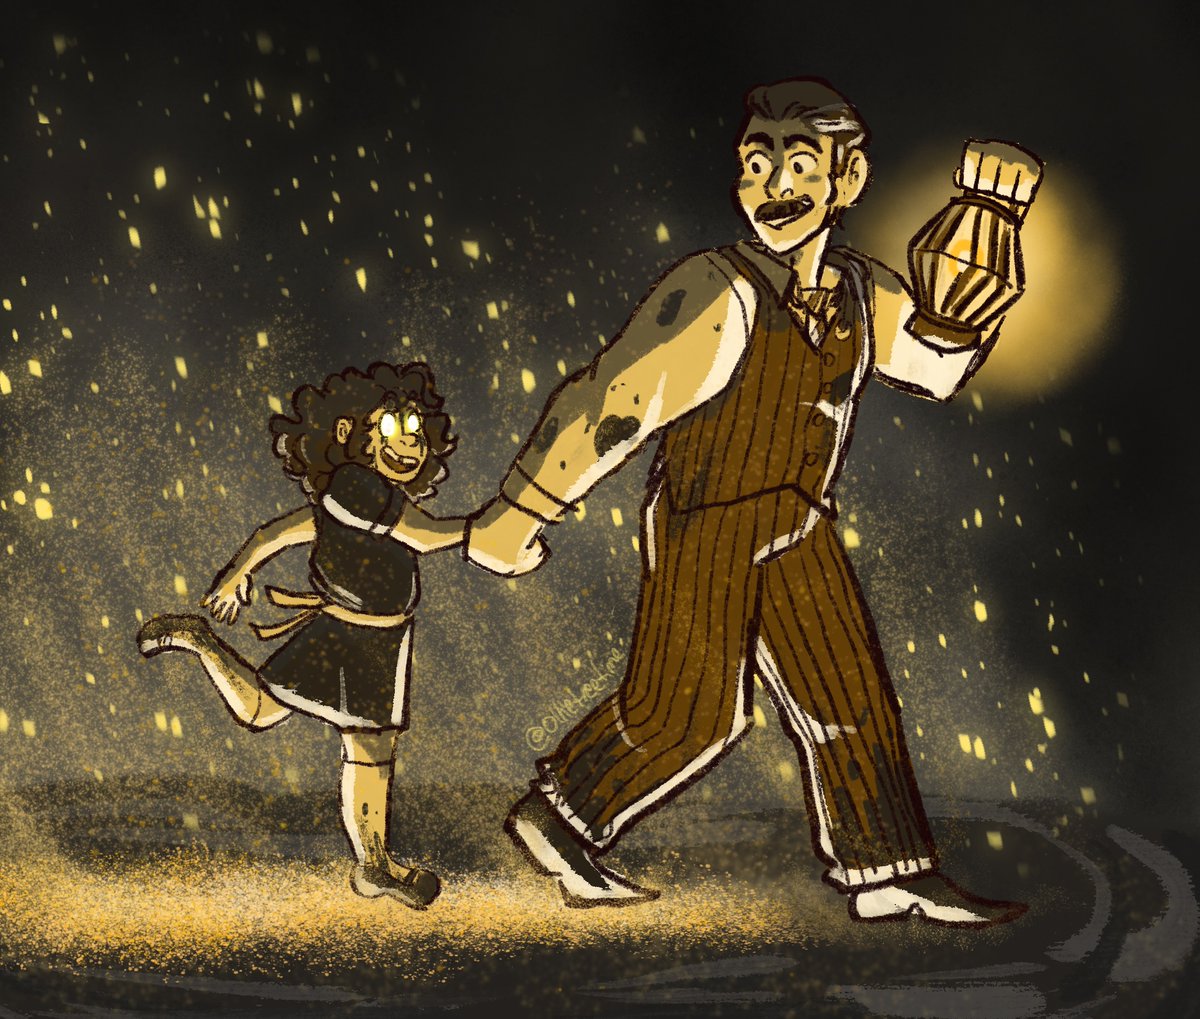 Bright and kind. Almost human.
Happy Father's Day! 
#BATDR #BENDY #Bendy_and_the_Dark_Revival